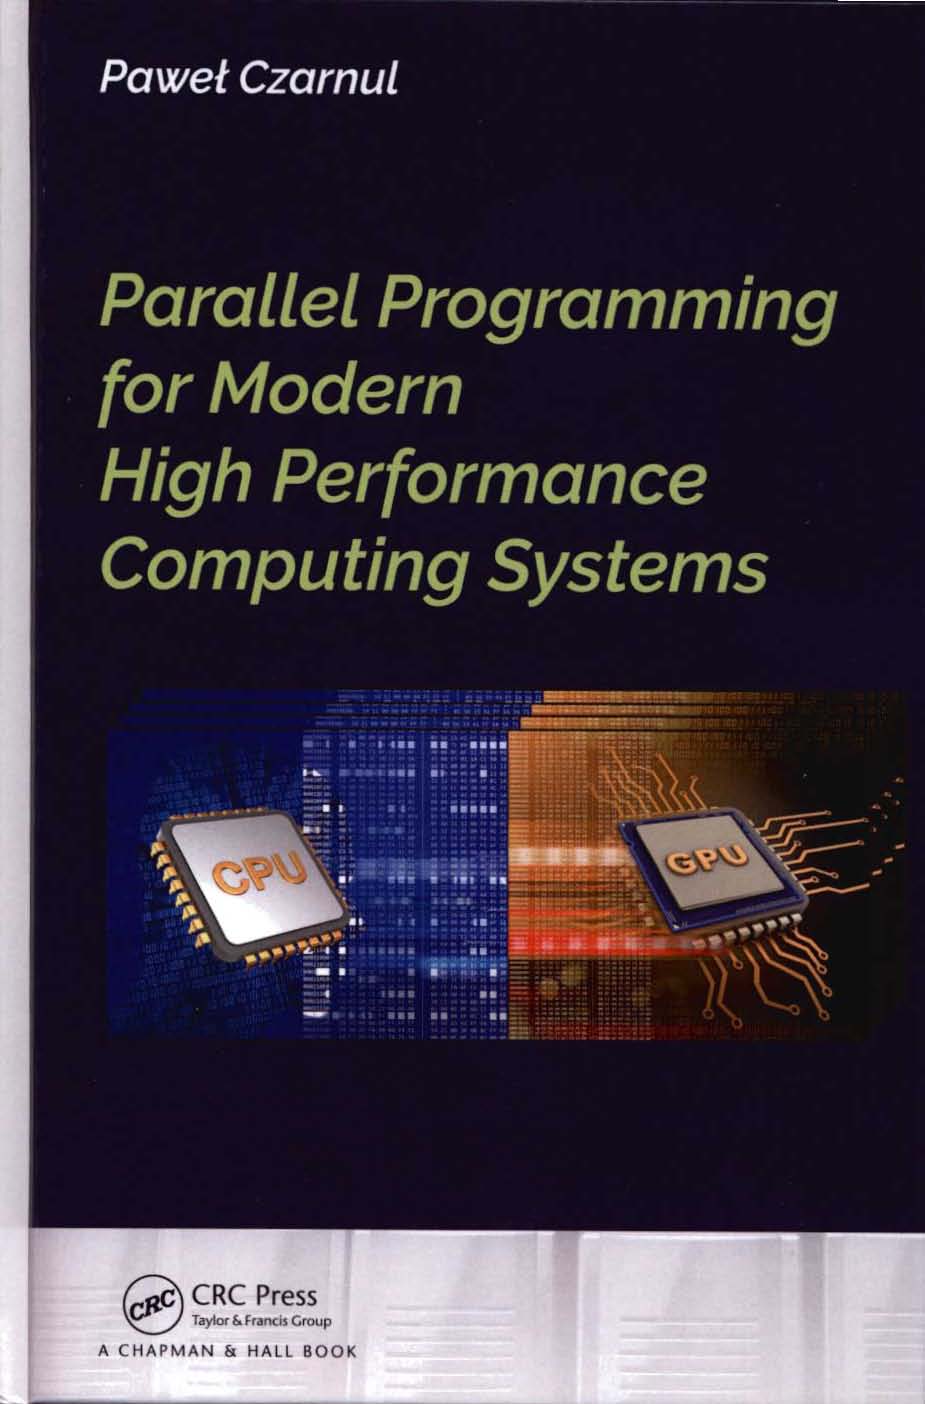 High performance parallel